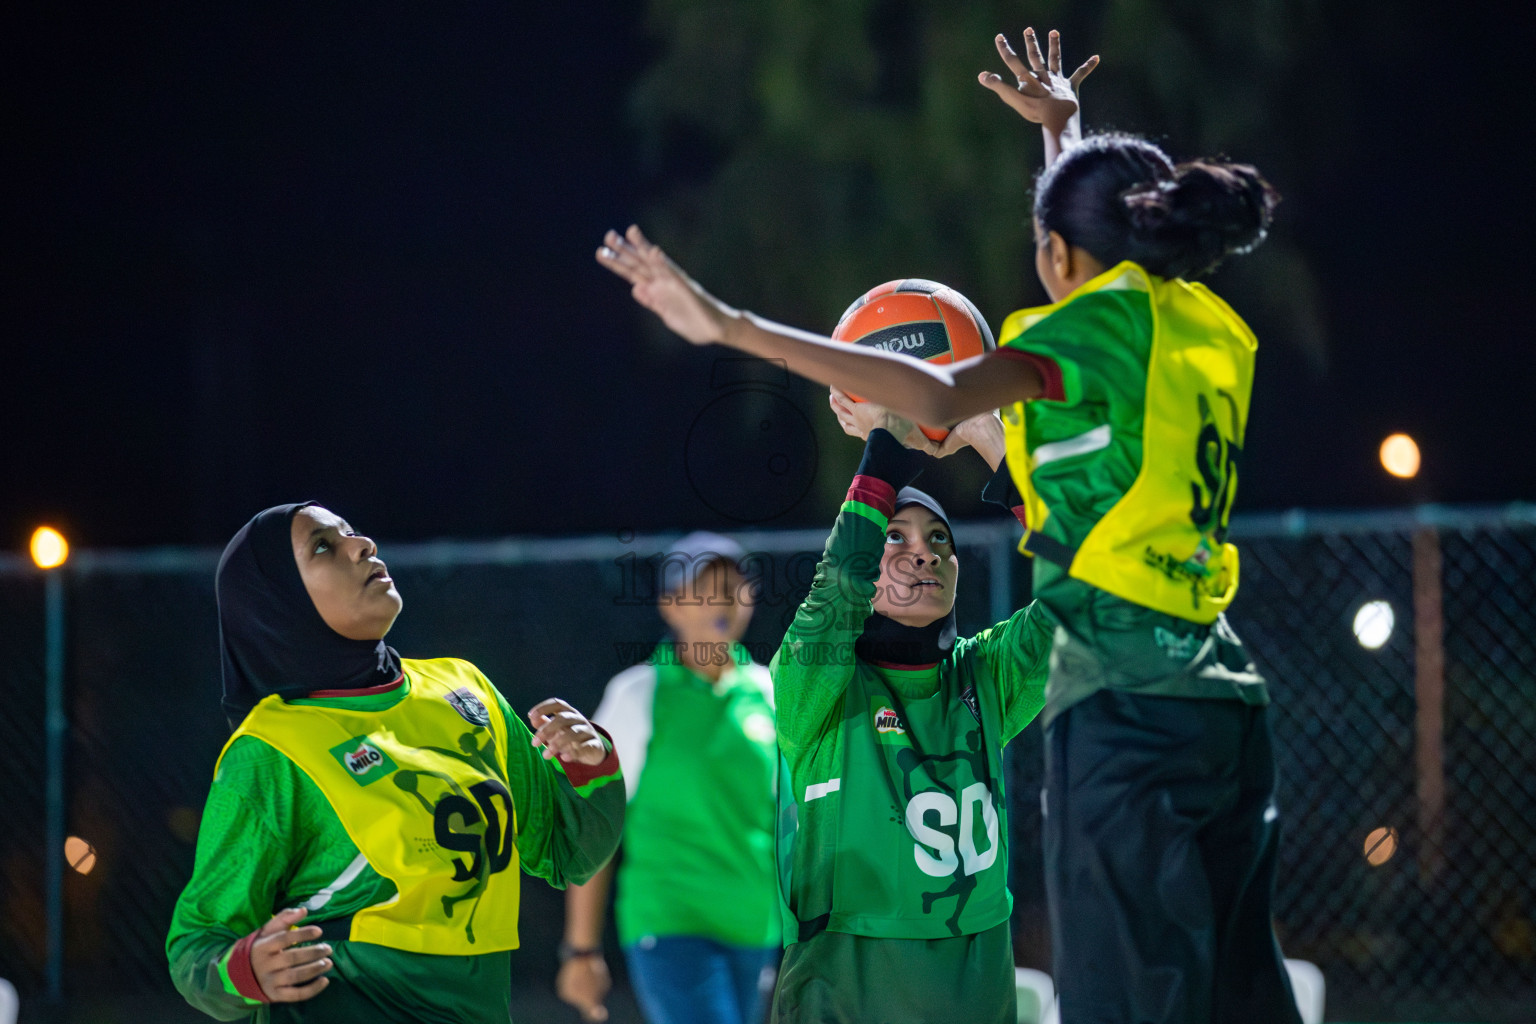 Day 1 of Milo Ramadan Half Court Netball Challenge on 21st March 2024, held in Central Park, Hulhumale, Male', Maldives